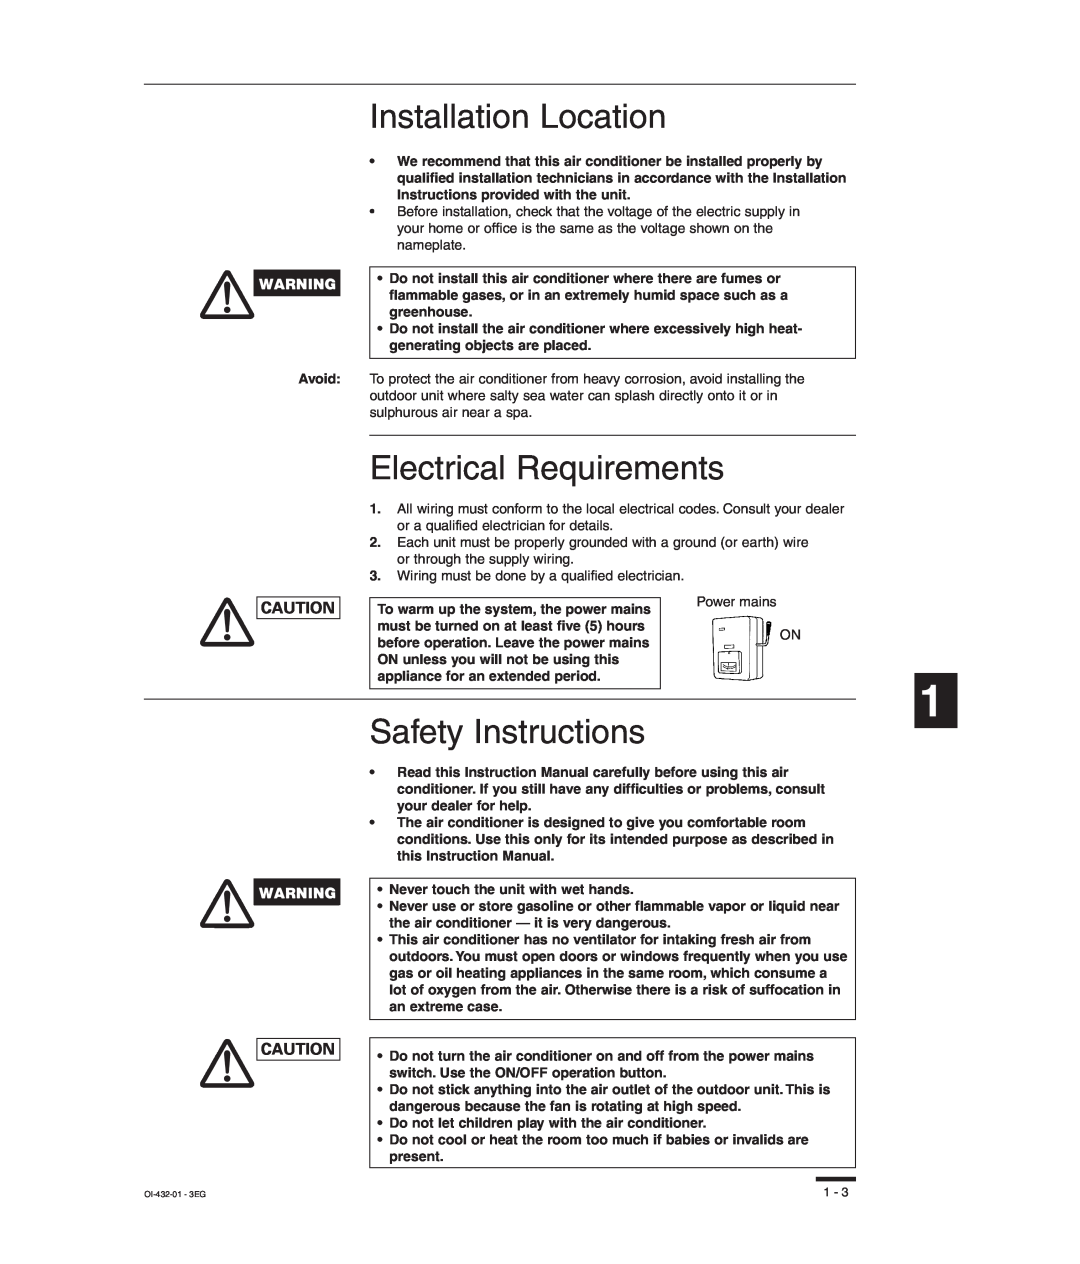 Sanyo SHA-KC64UG, TM-SH80UG, RCS-SH80UG, RCS-SH80UA Installation Location, Electrical Requirements, Safety Instructions 